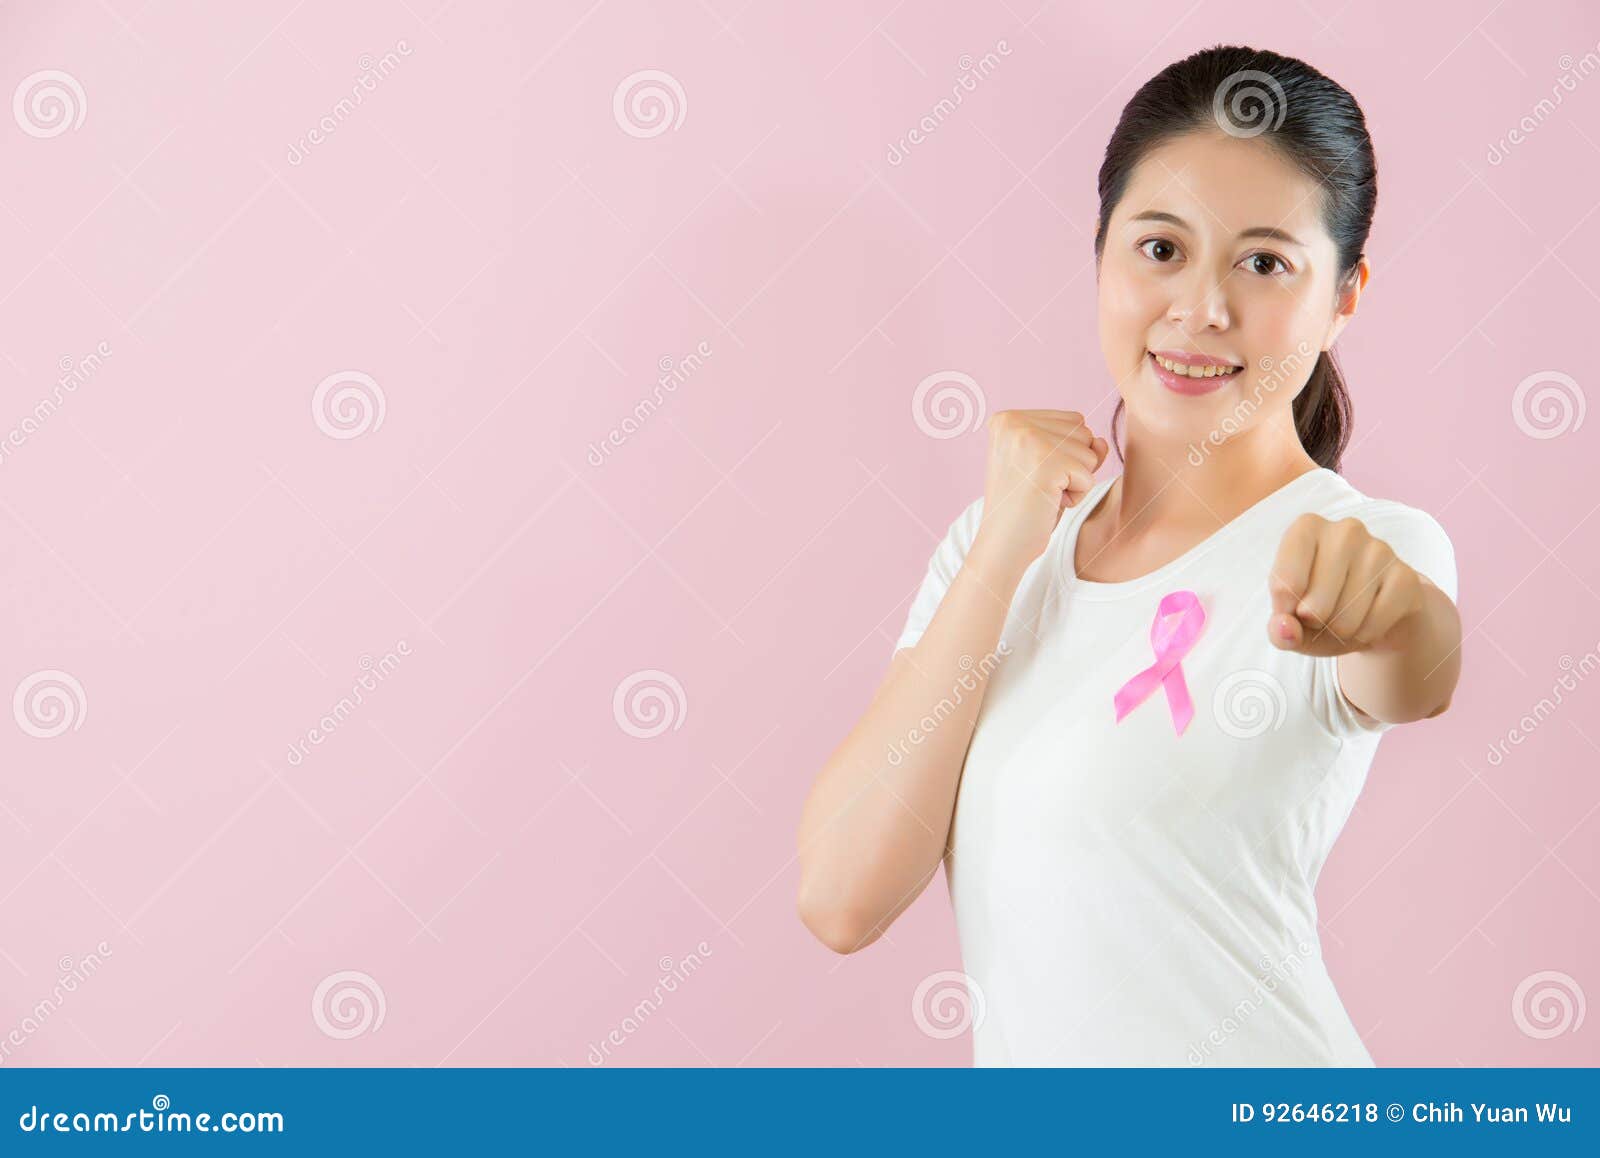 chinese girl make a fist elongation her arms